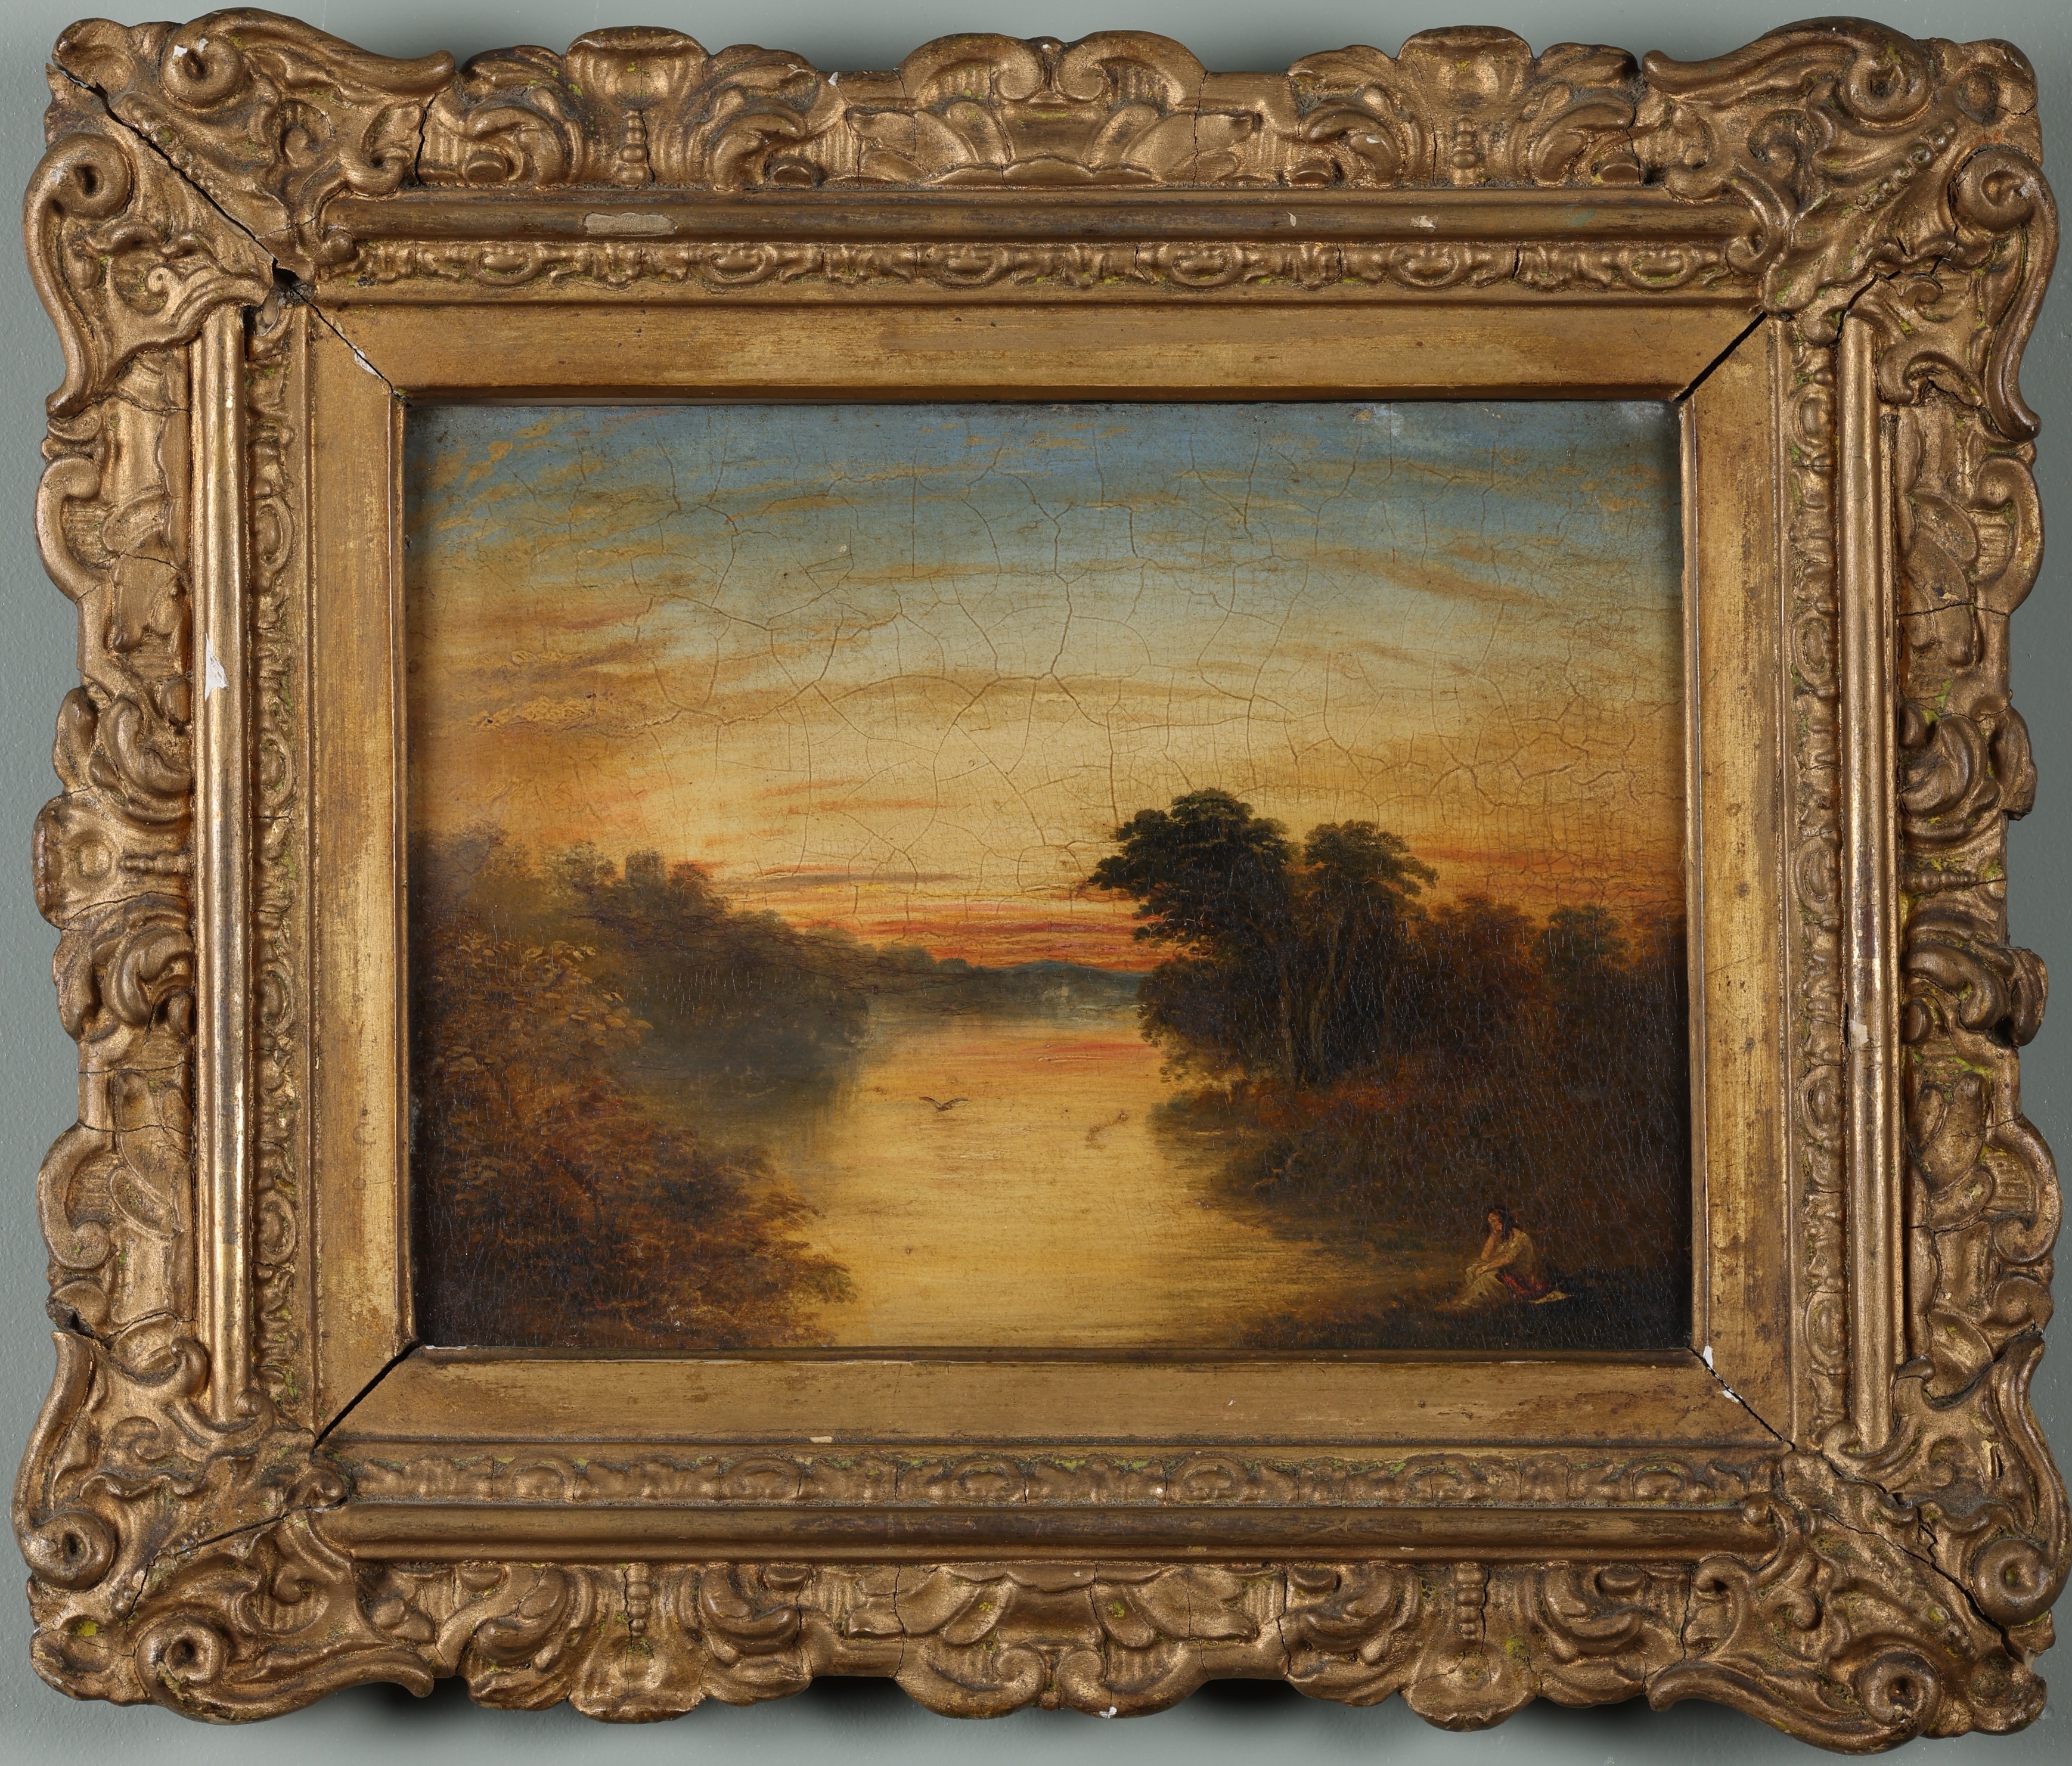 Circle of J. M. W. Turner, River landscape with a figure